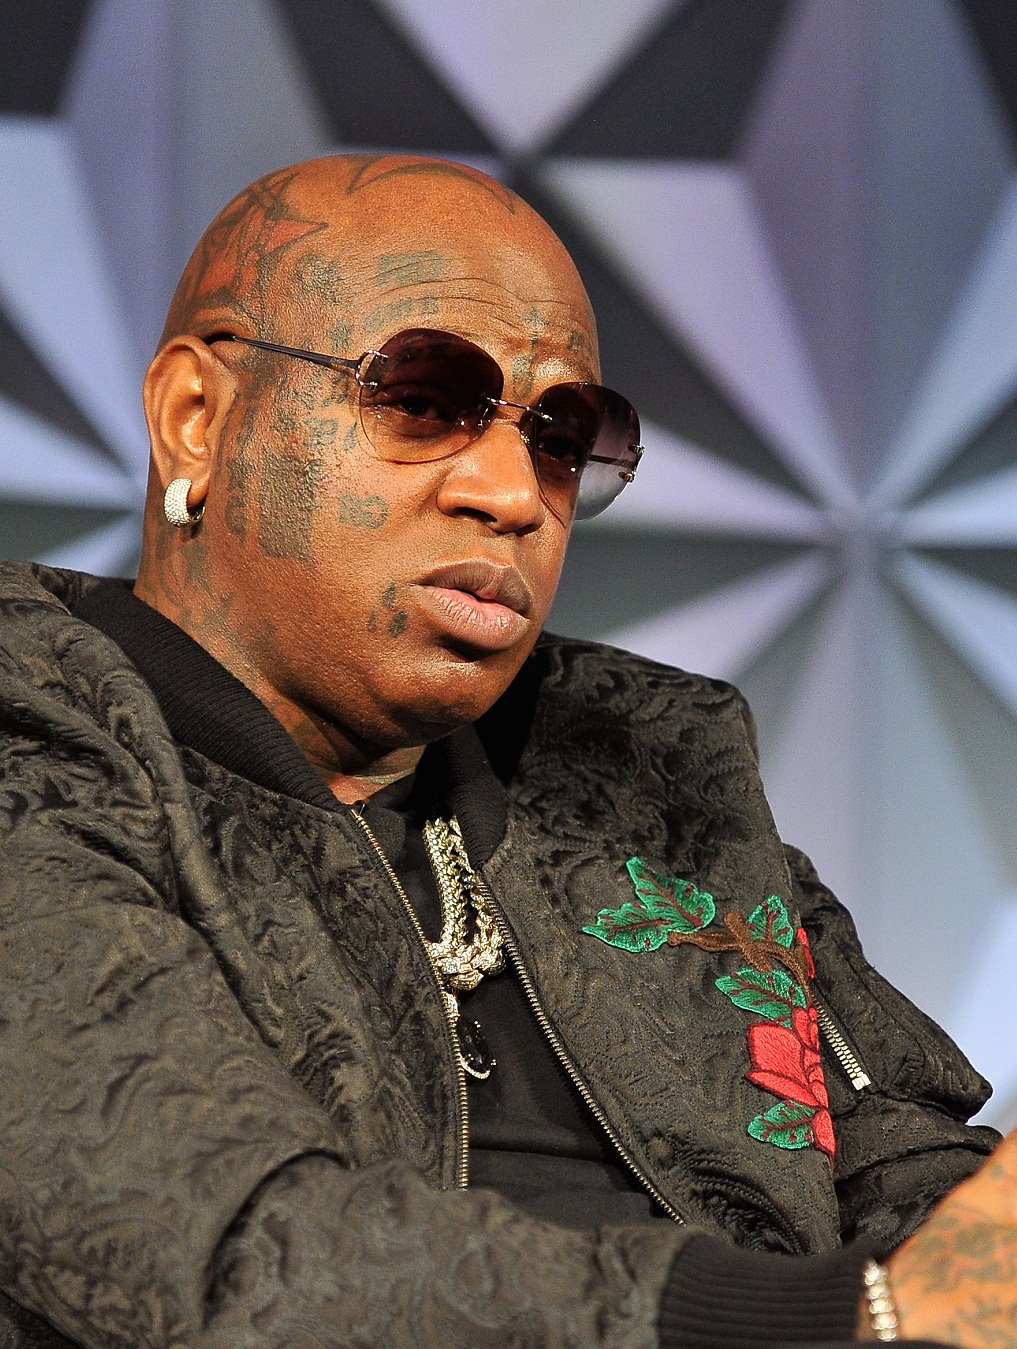 Birdman Consulted With 50 Cent For Face Tat Removal Advice  YouTube